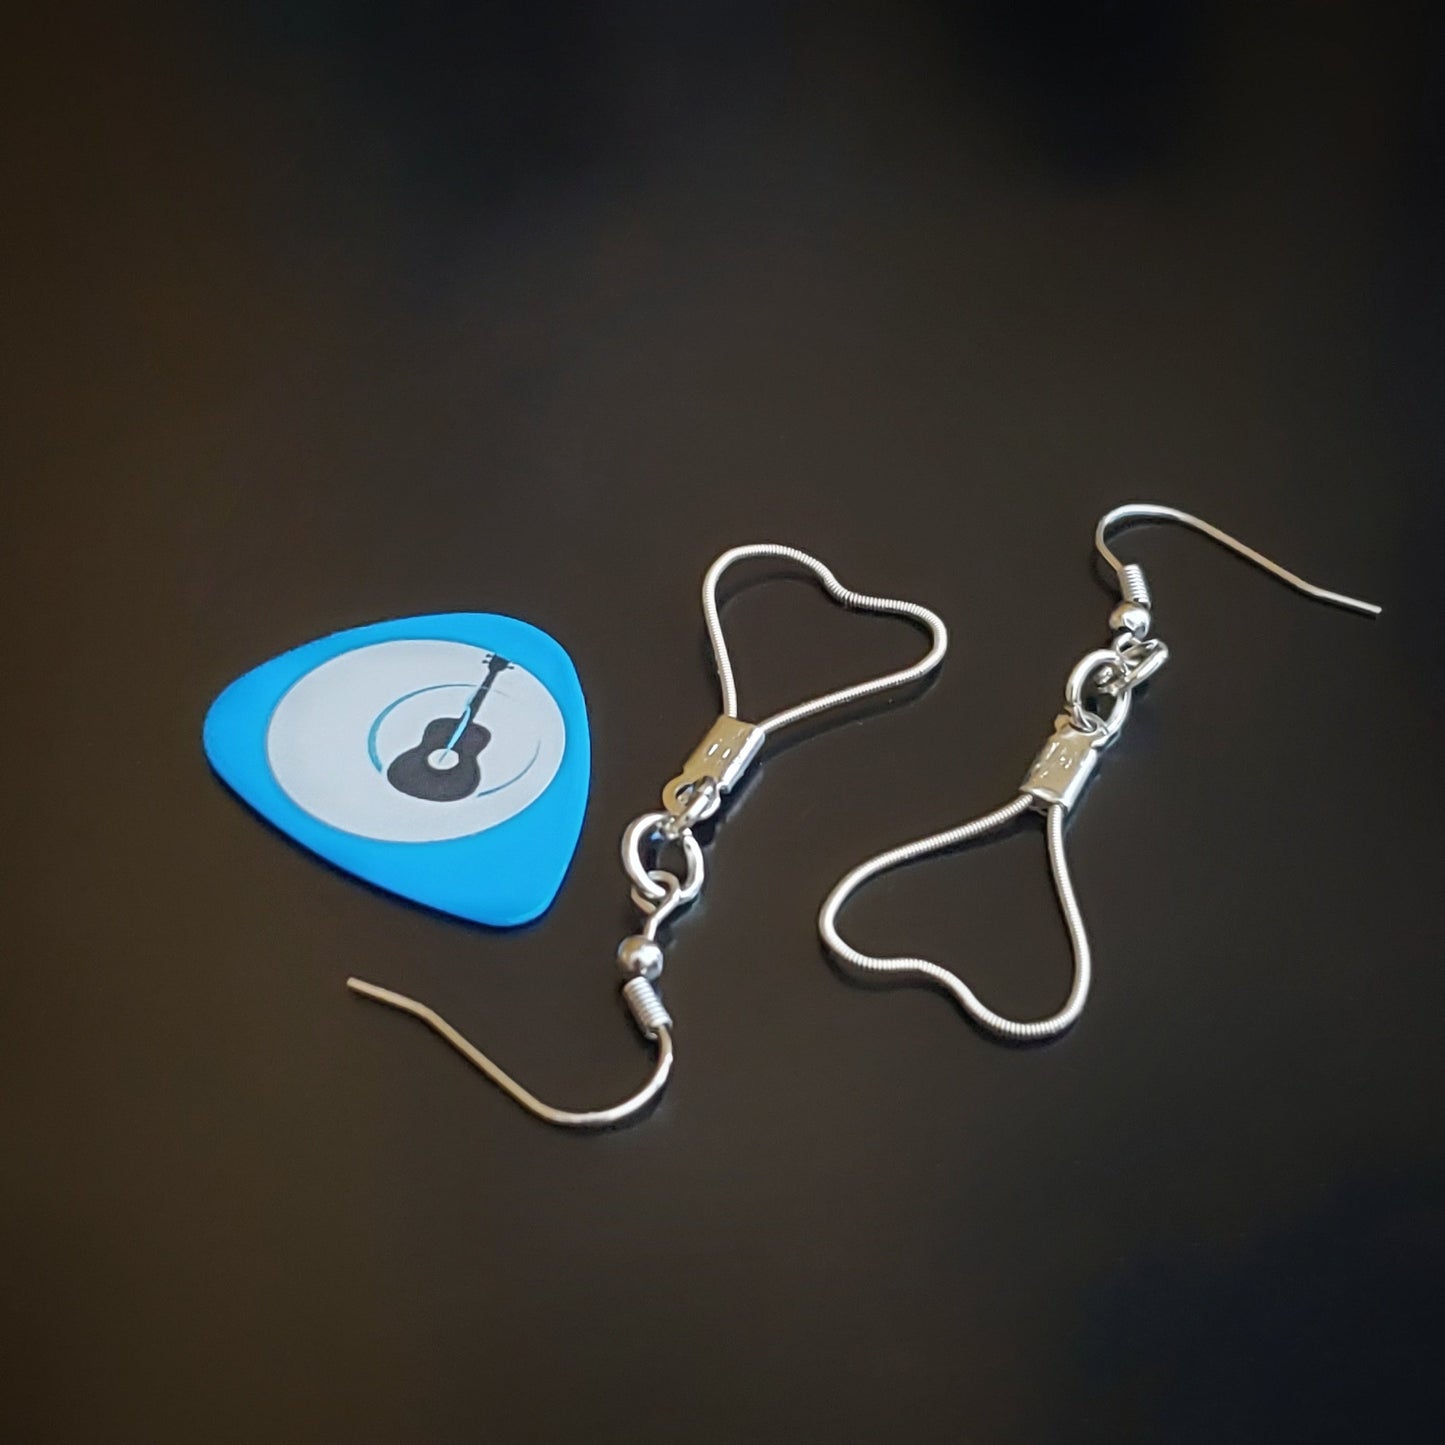 pair of heart shaped earrings made from upcycled guitar strings next to a blue guitar pick with the image of a black guitar